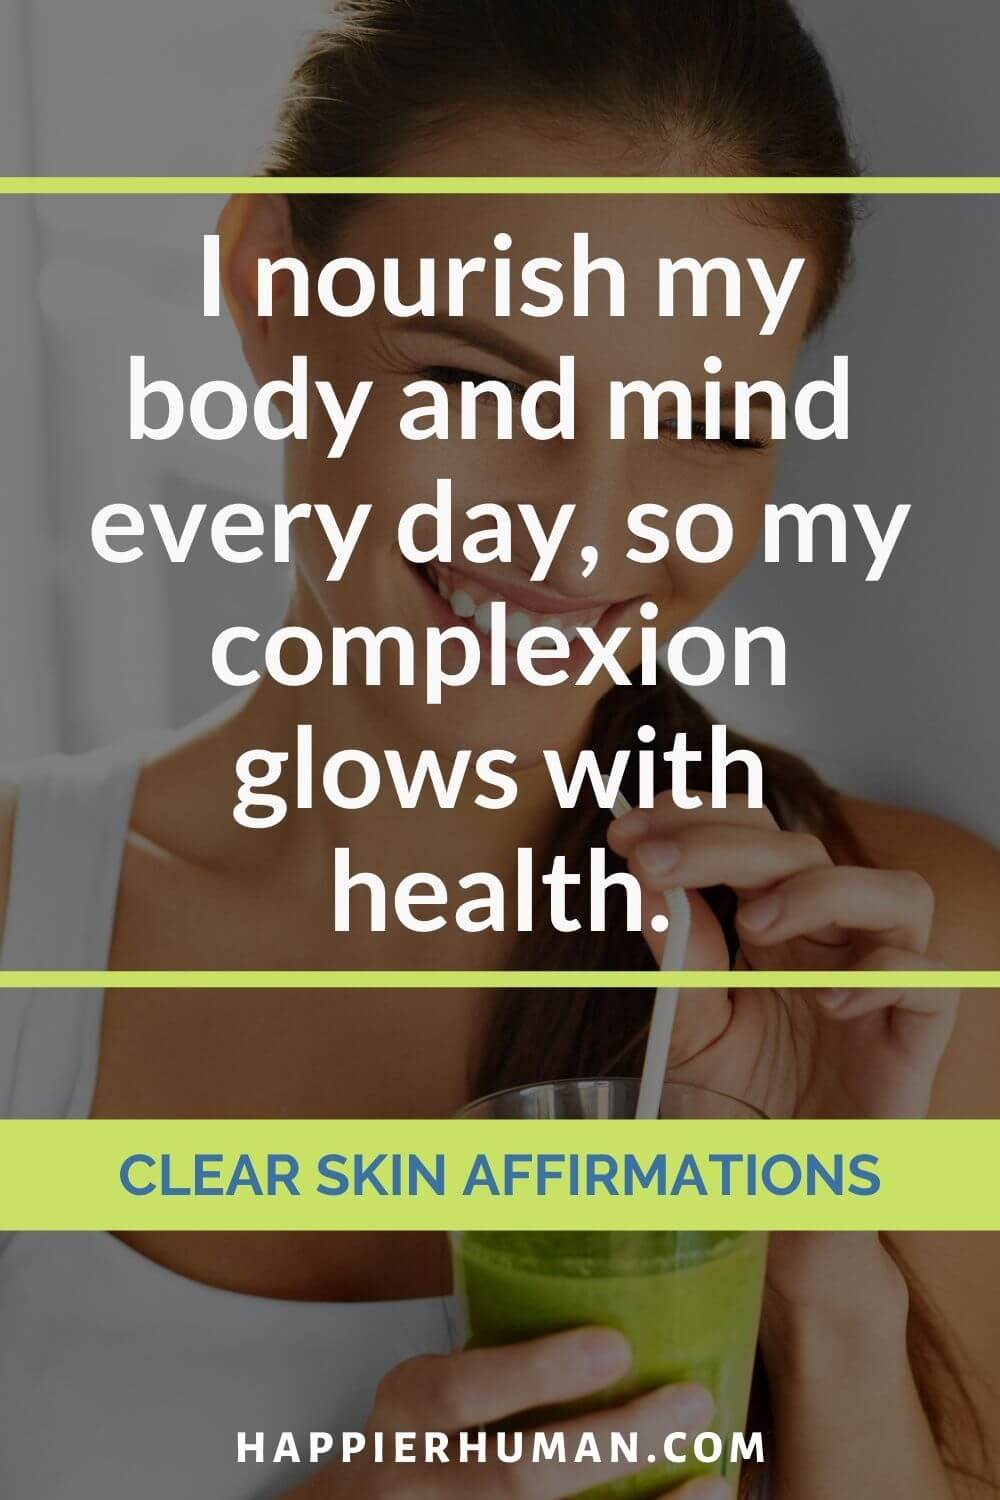 Clear Skin Affirmations - I nourish my body and mind every day, so my complexion glows with health. | affirmations for itchy skin | acne scar affirmations | subliminal affirmations for clear skin